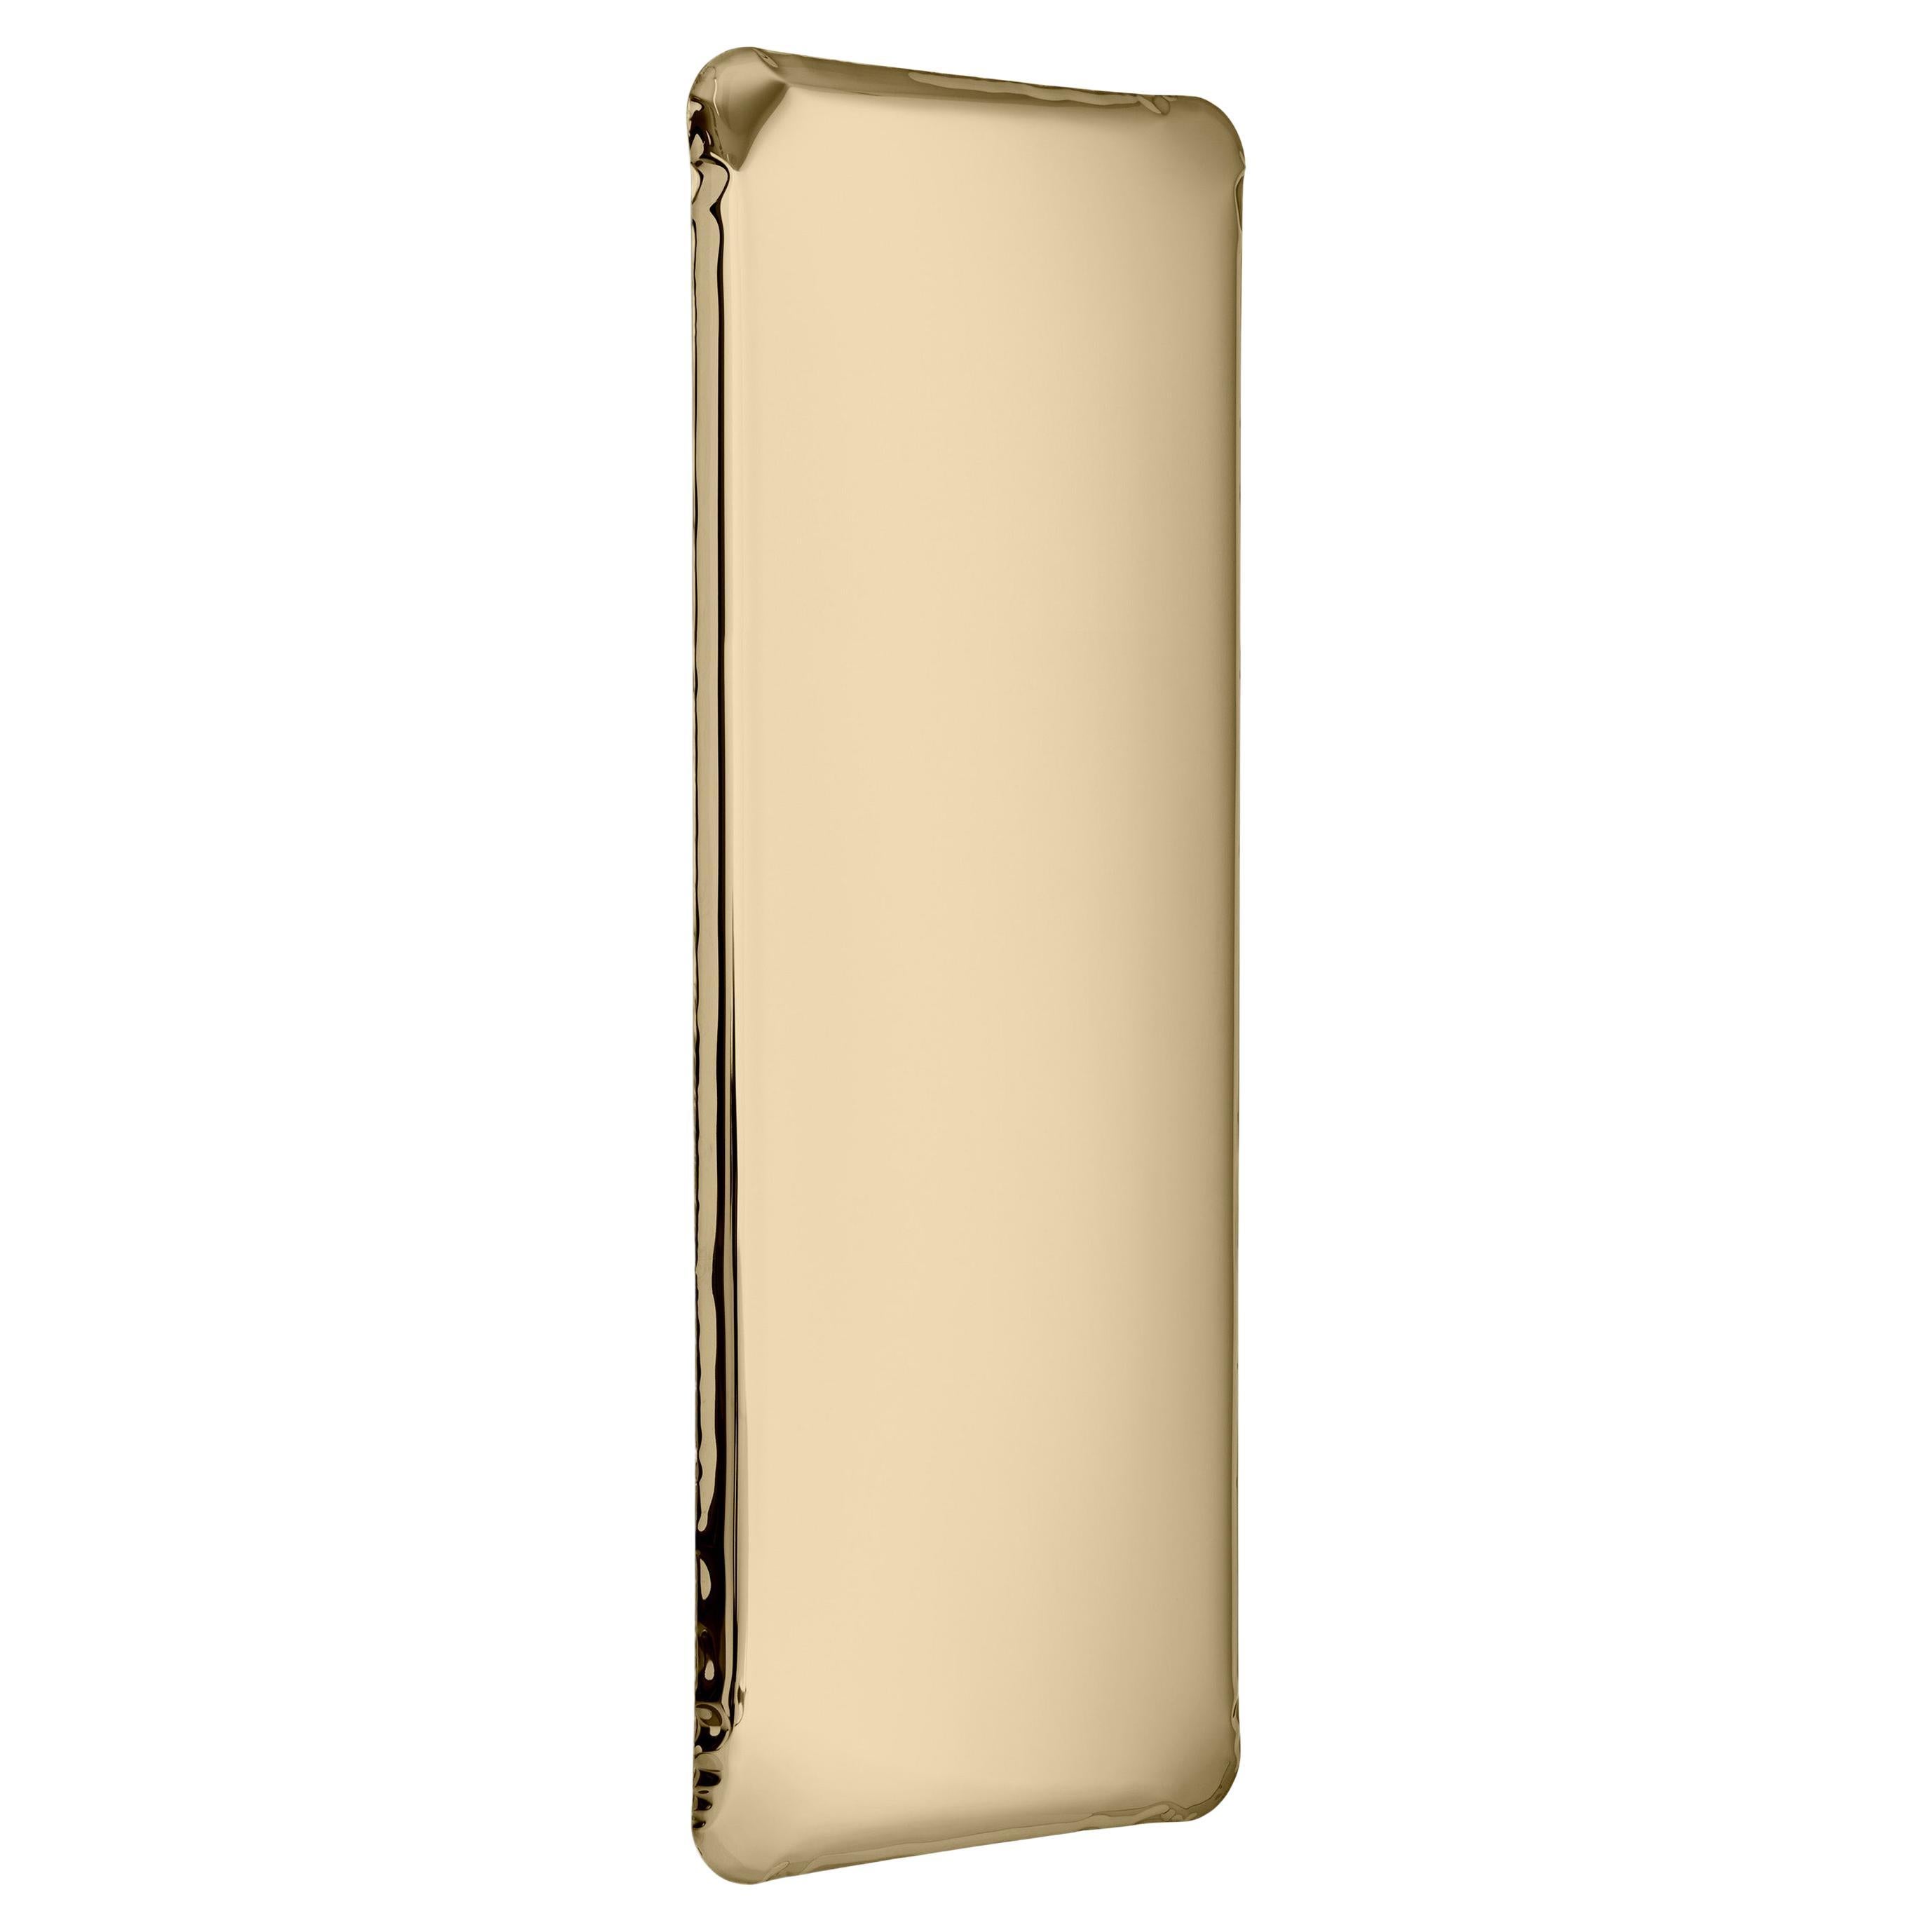 Tafla Q1 Polished Stainless Steel Classic Gold Color Wall Mirror by Zieta